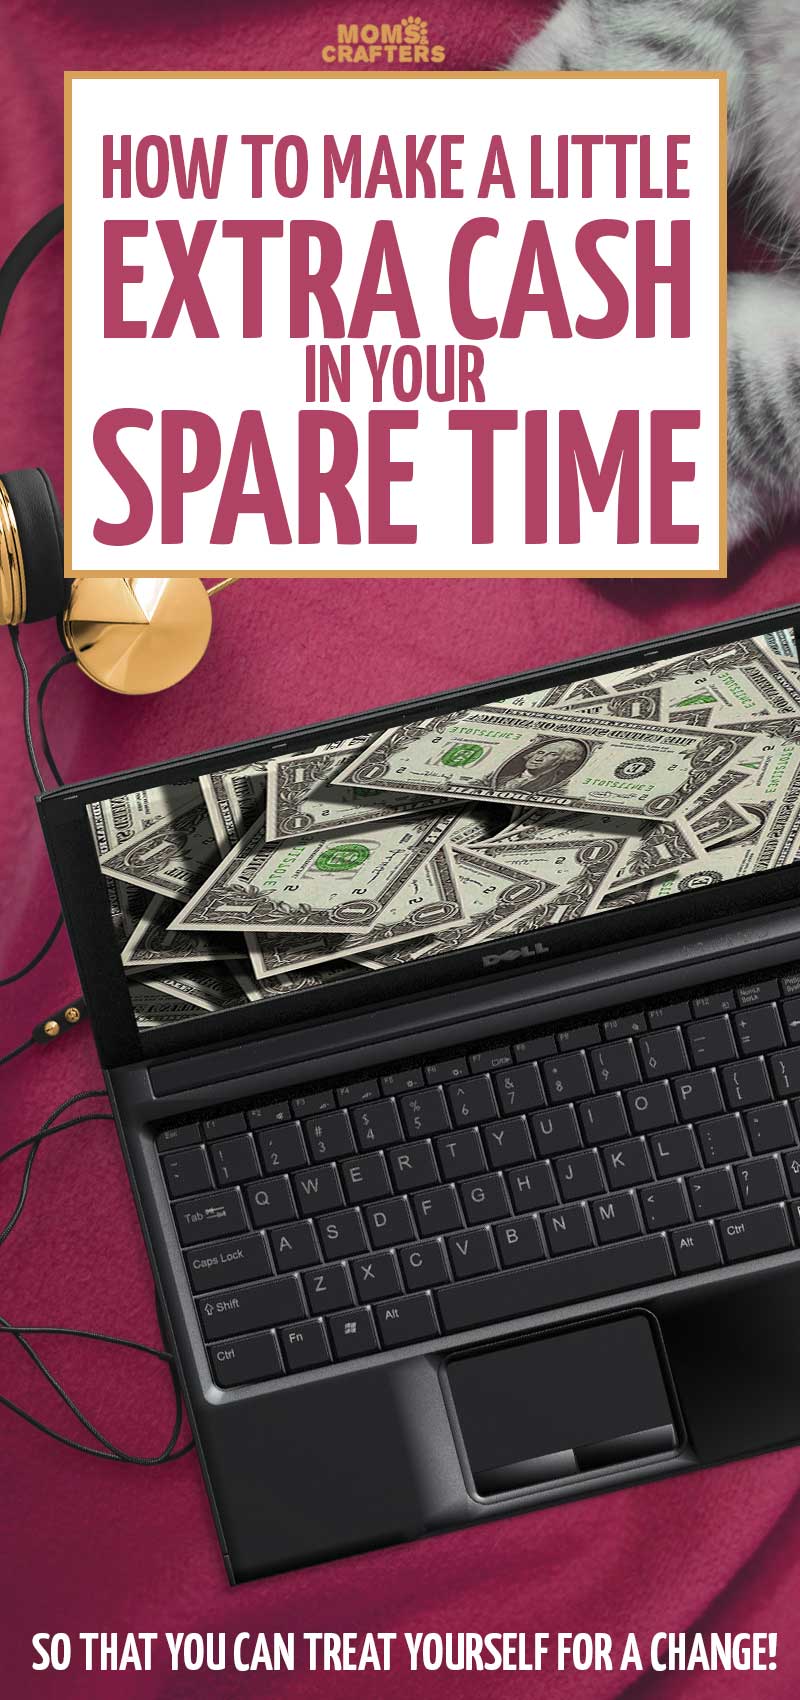 Looking for small tips for how to earn money online? These 4 easy ideas are good for everyone to do as a side hustle to earn that extra pocket cash so you can splurge! These ideas are great legitimate online jobs for stay at home moms who have a little extra time. I've been in that position and decided it's time to share some ideas!